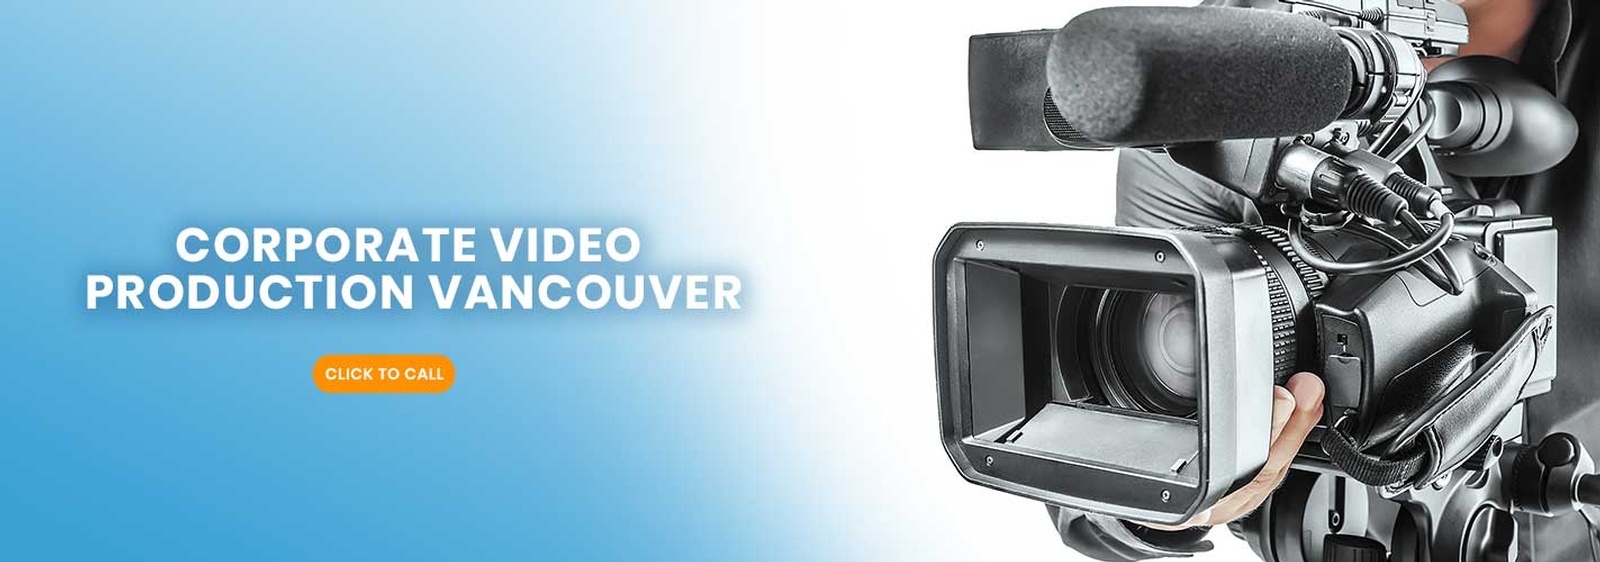 Corporate Video Production Vancouver